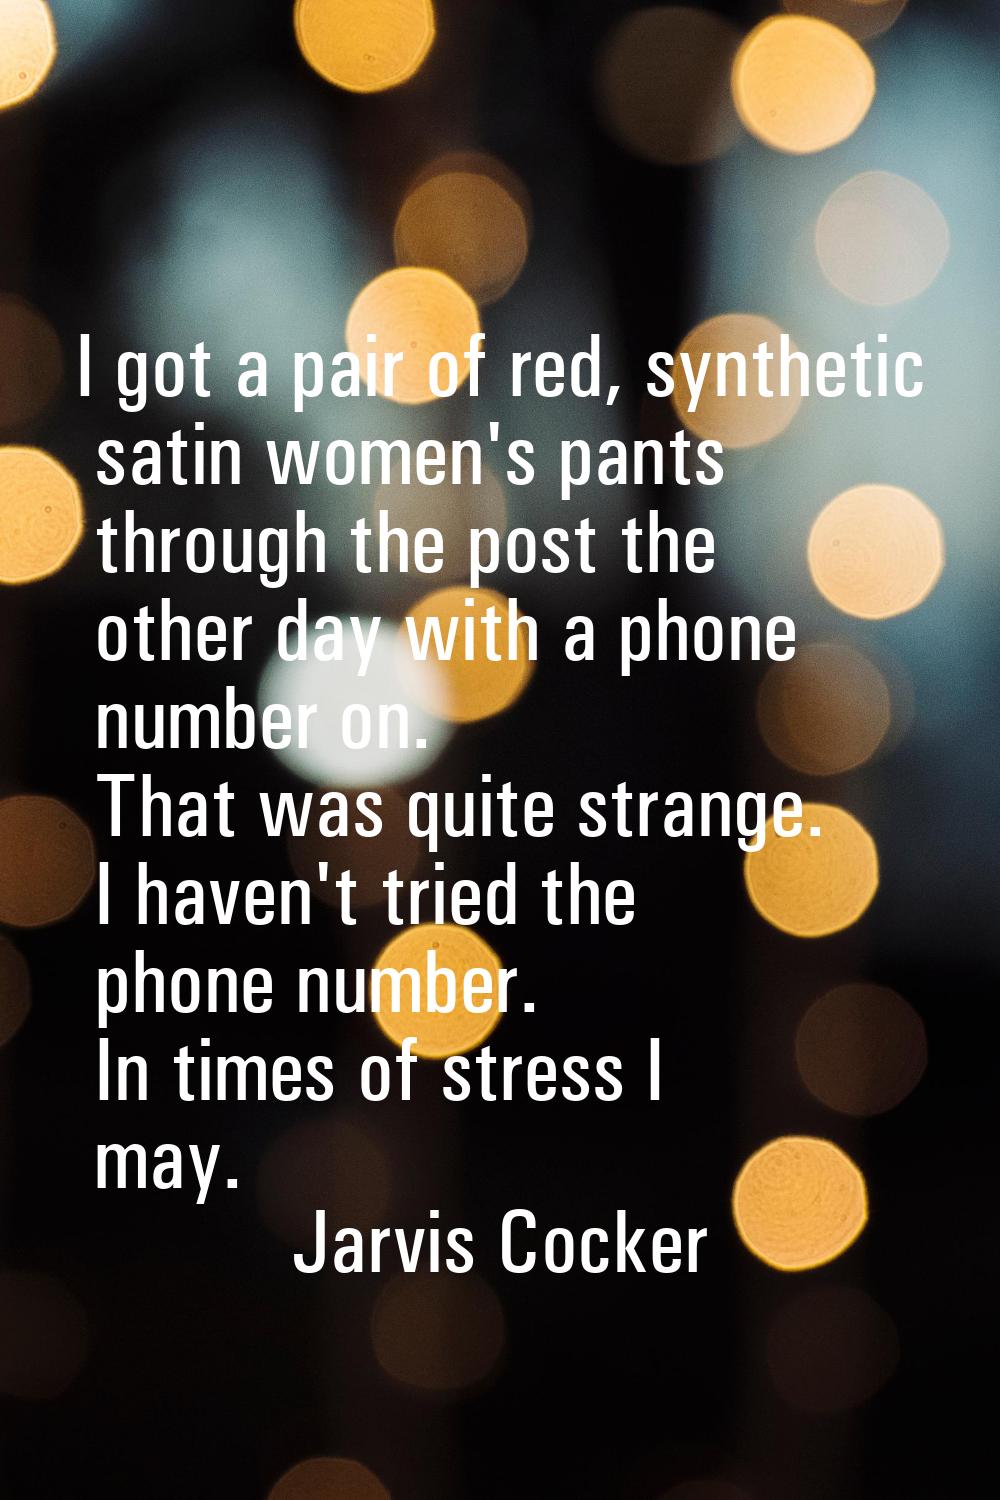 I got a pair of red, synthetic satin women's pants through the post the other day with a phone numb